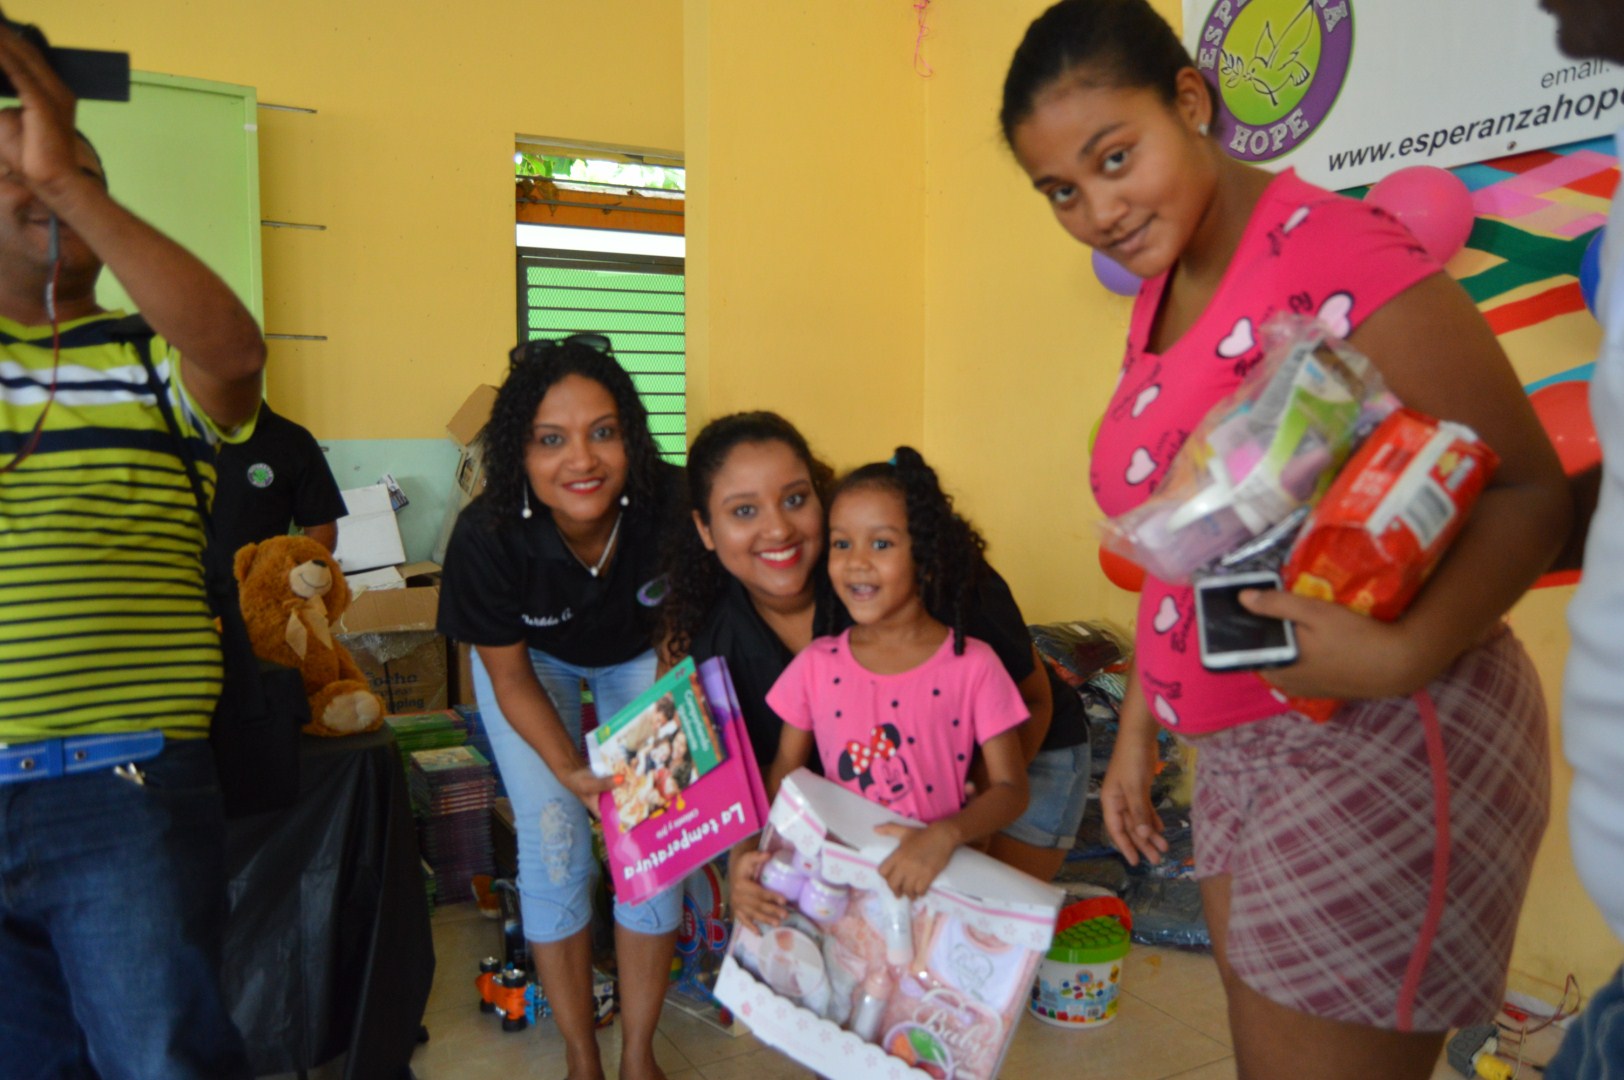 Three women, one holding clothes, and a child holding books and a toy